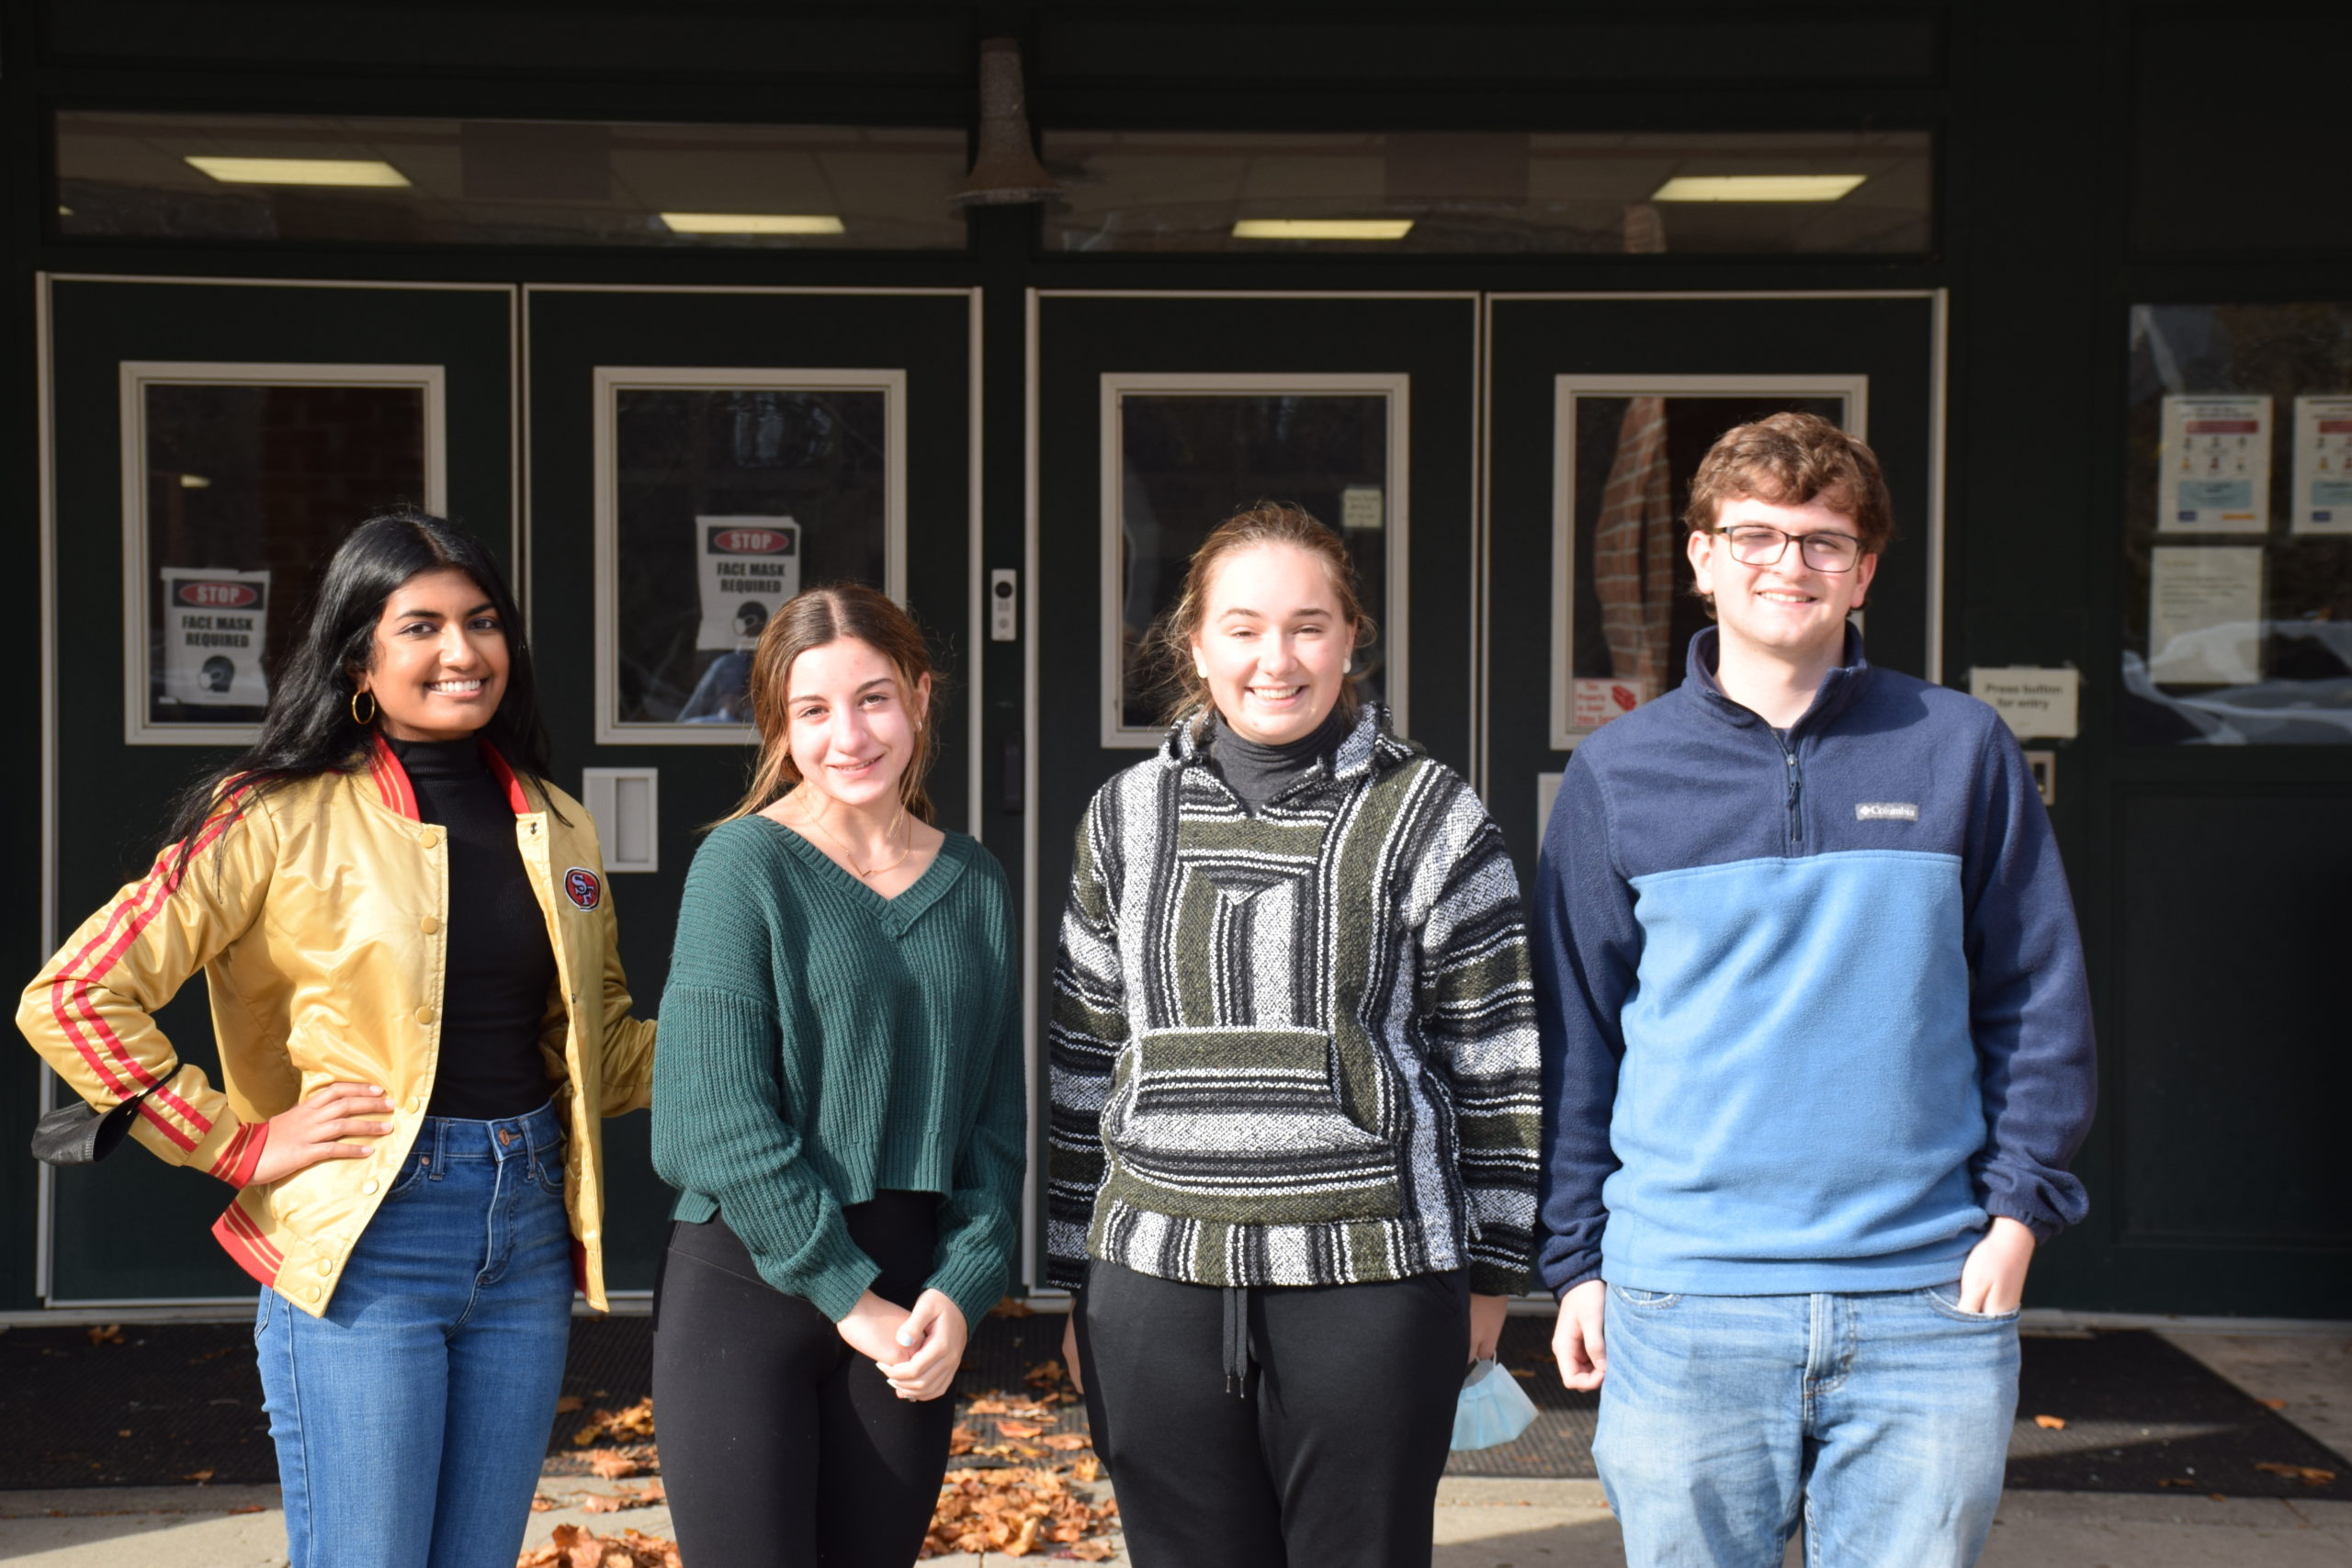 Five Westhampton Beach High School musicians have been selected to perform with the New York State Band Directors Association High School Honor Band in Syracuse this March.